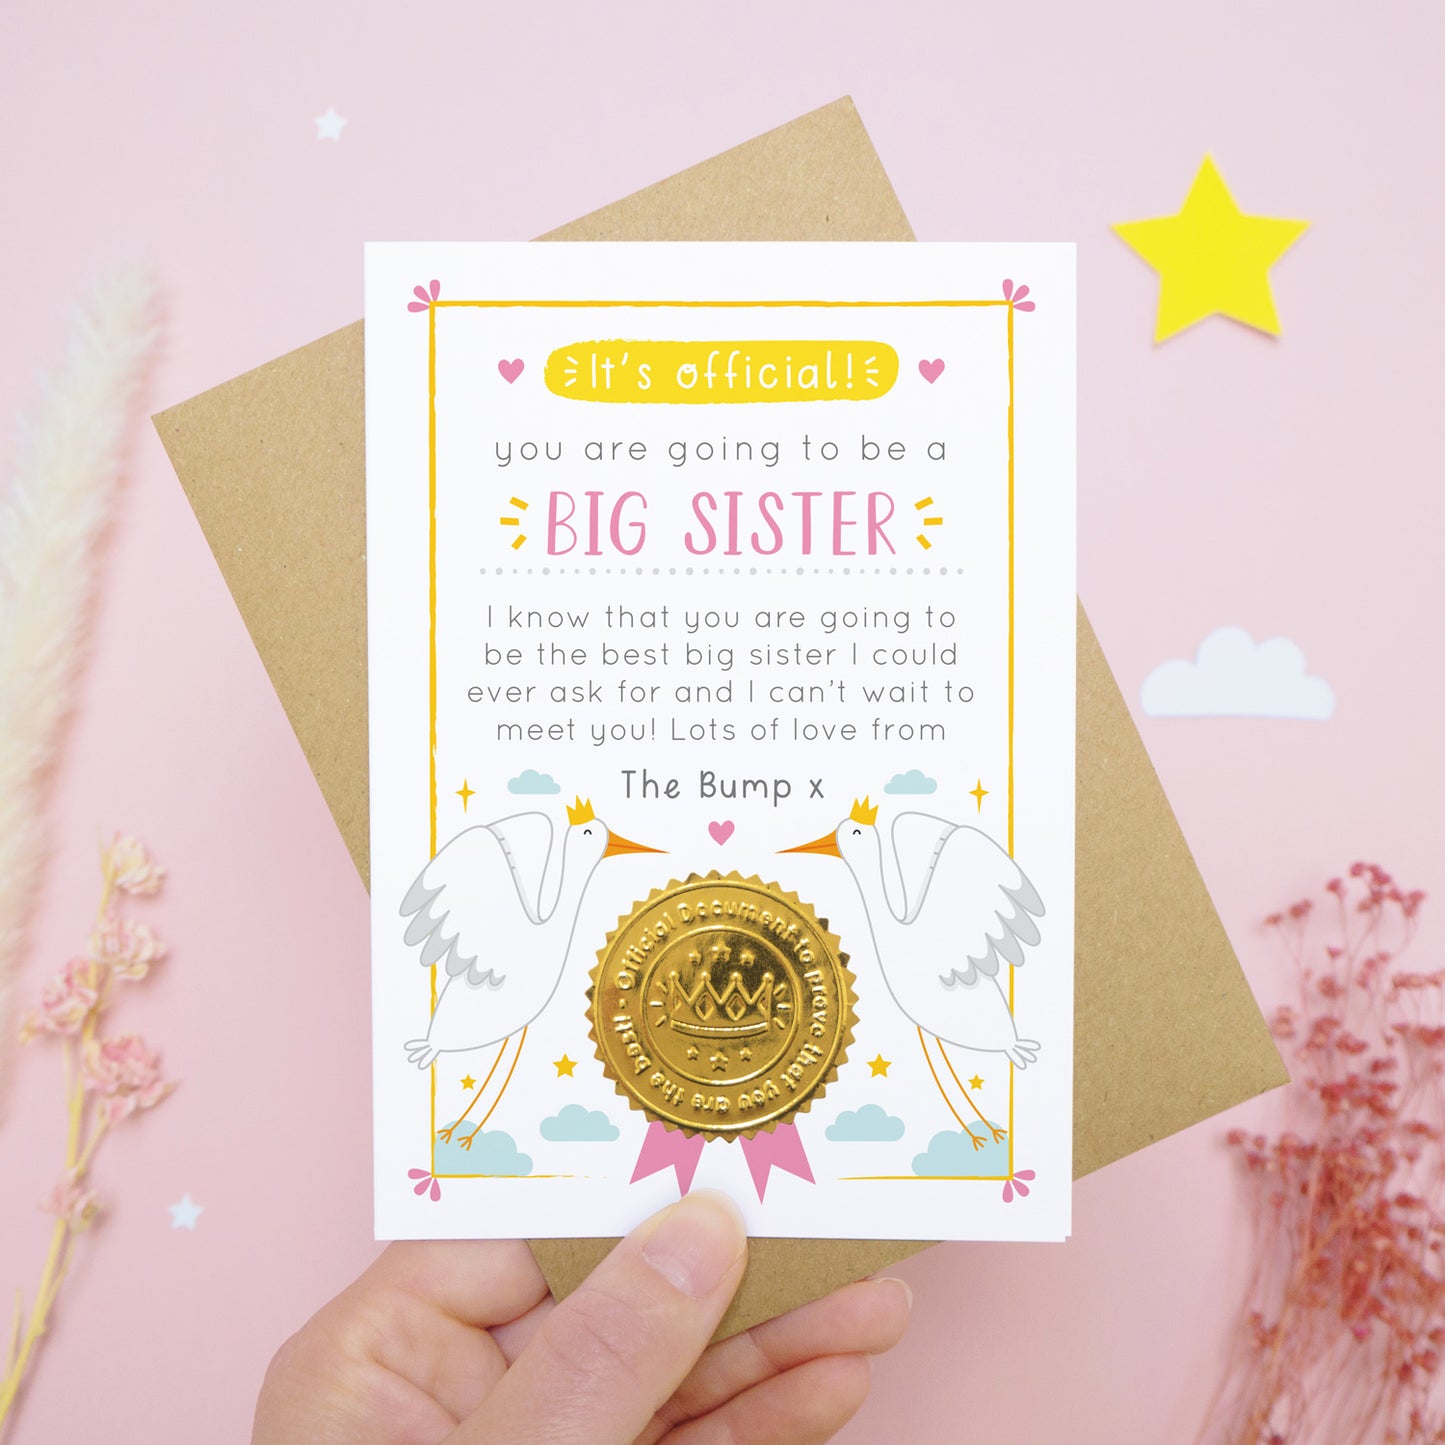 A big sister pregnancy announcement card featuring storks, clouds and a note from the bump. The card is being held over a pink background with dried flowers, stars and a cloud.